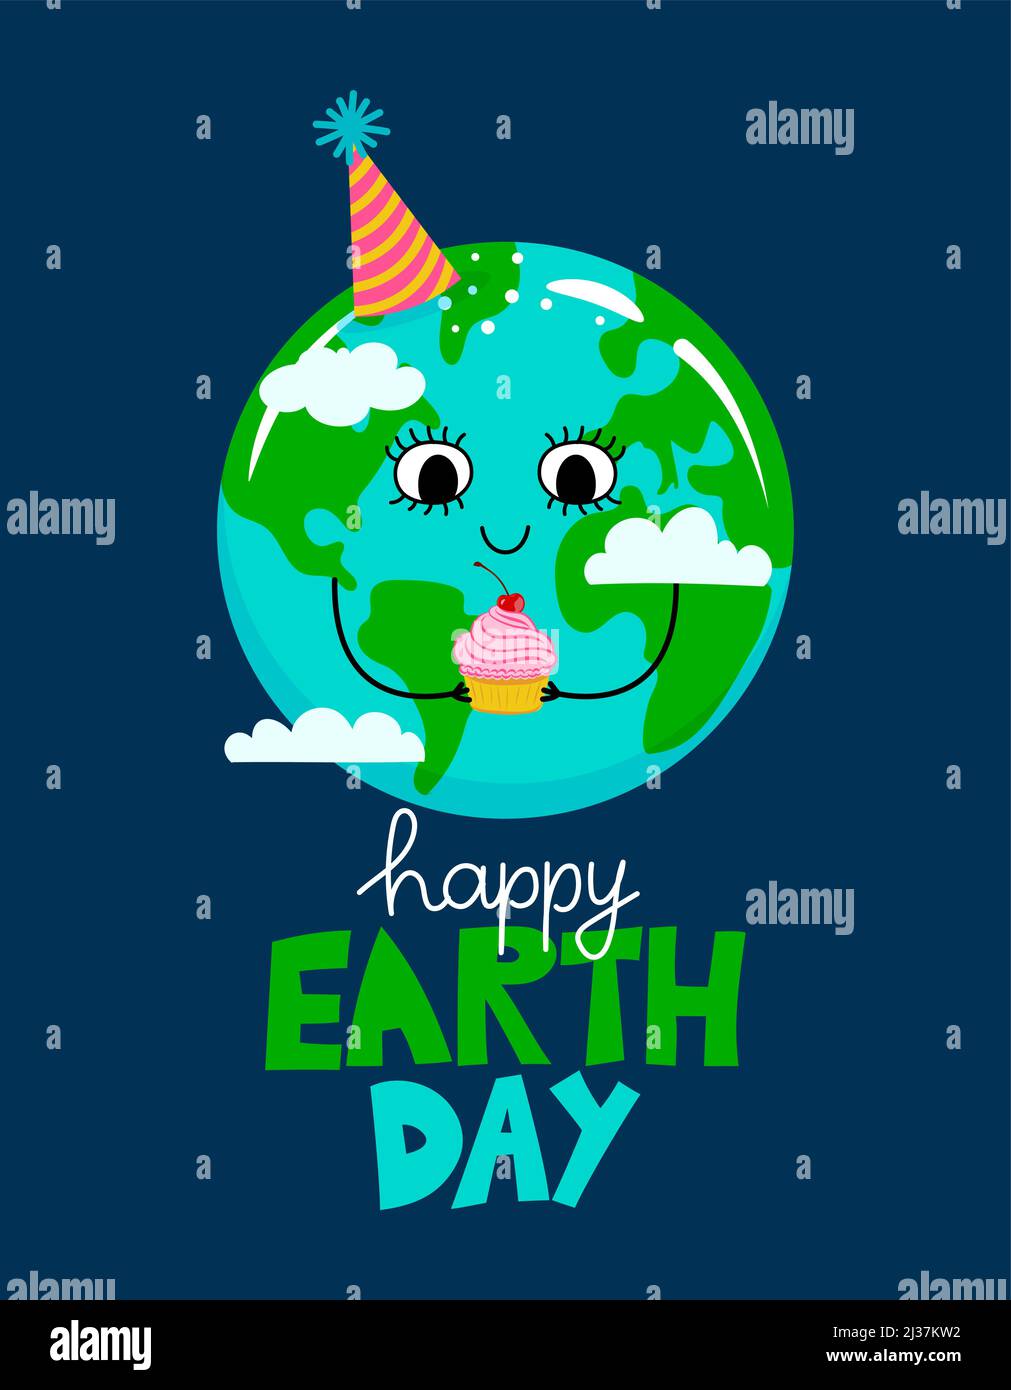 Happy Earth Day - Planet Earth kawaii drawing with birthday cake. Poster or t-shirt textile graphic design. Beautiful illustration. Earth Day environm Stock Vector